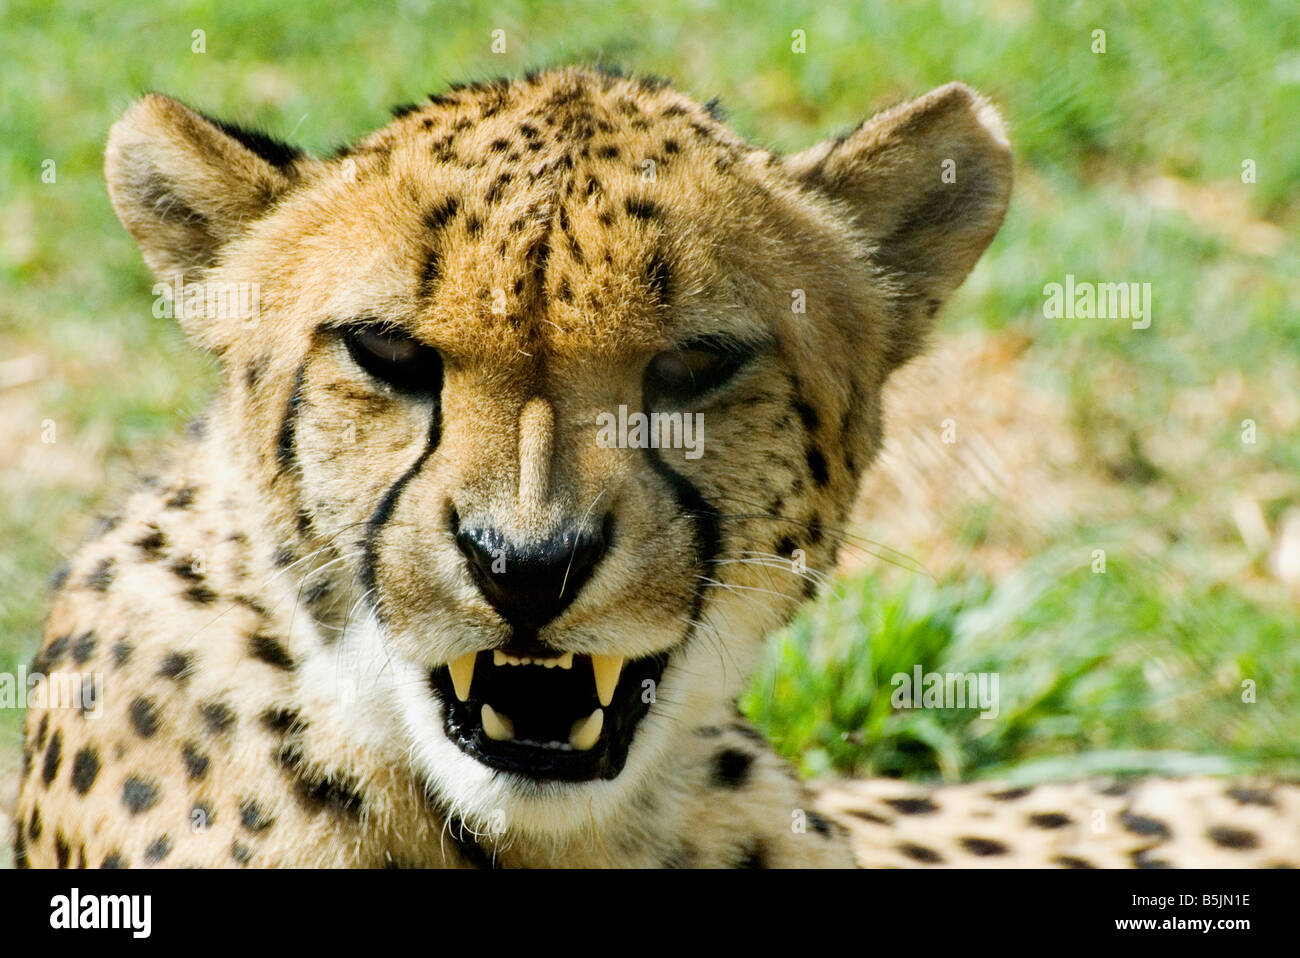 Close up of Cheetah head - mouth open growling with teeth exposed Stock Photo